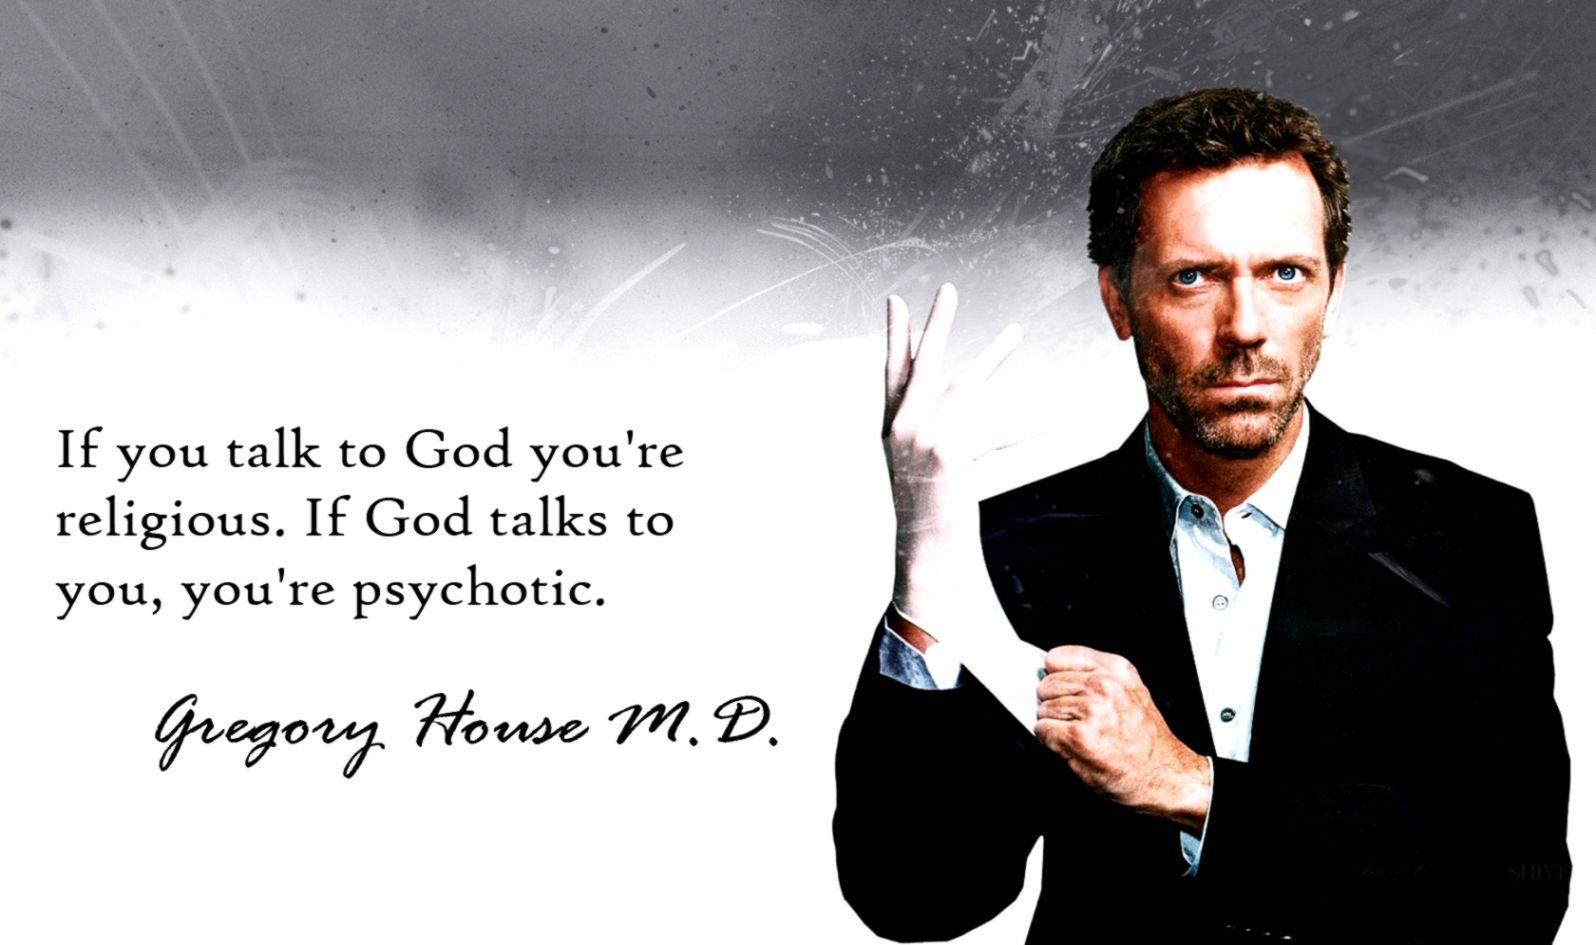 House Md Gregory House Hugh Laurie Artwork HD Wallpaper. Opera